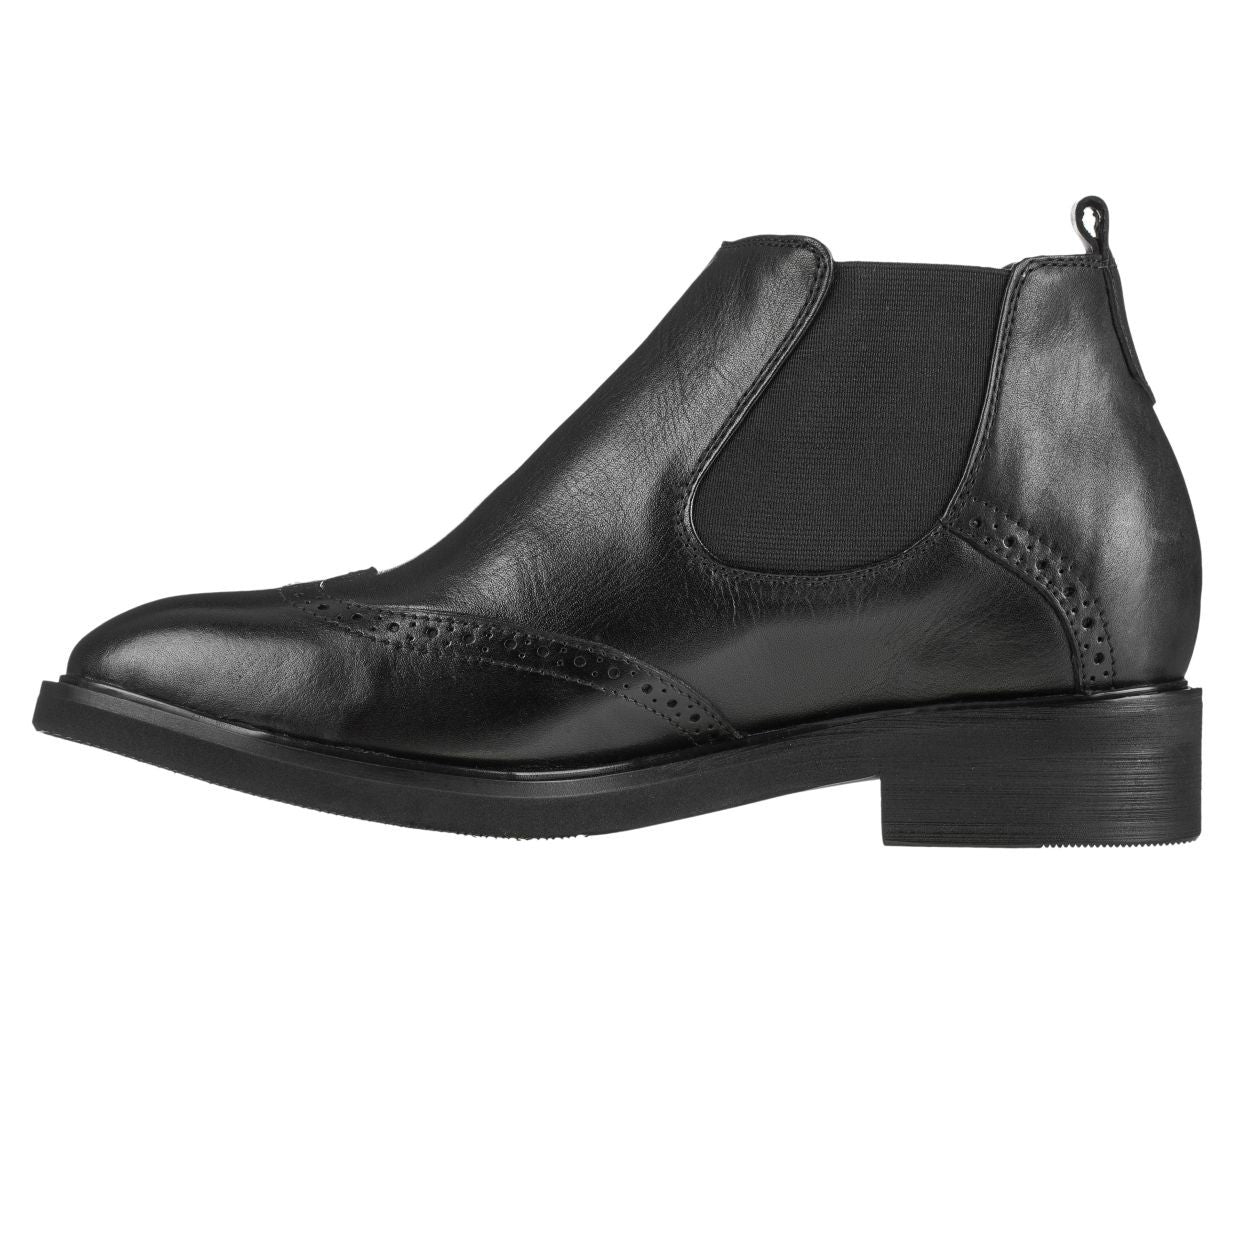 Elevator shoes height increase Leather Wing-Tip Ankle Boots - Three Inches - K28802